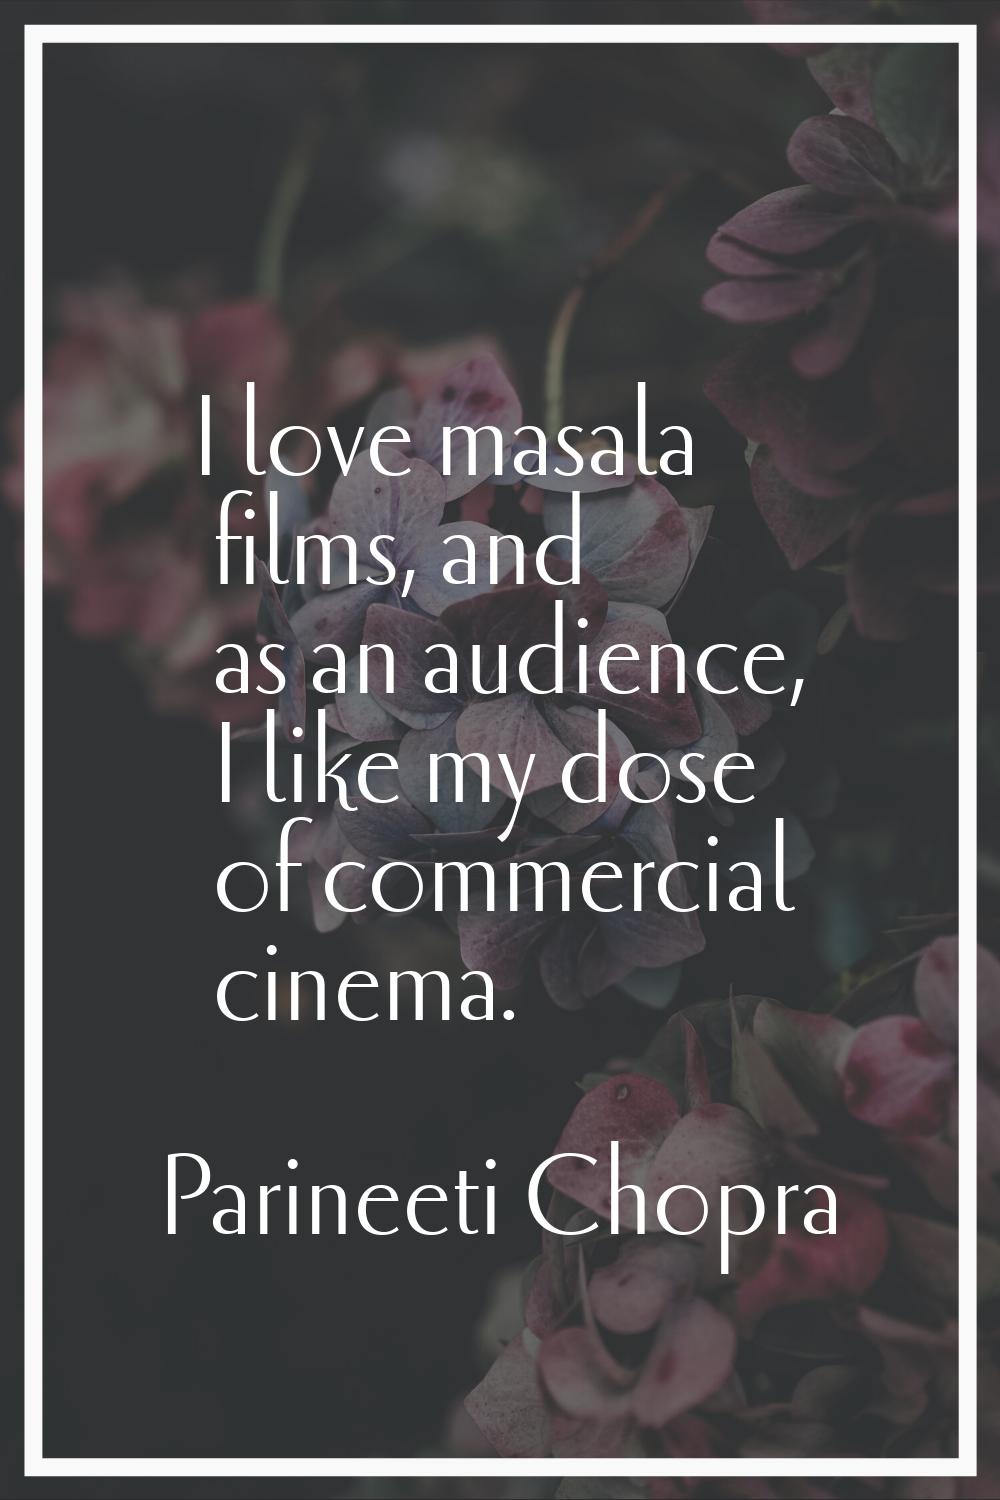 I love masala films, and as an audience, I like my dose of commercial cinema.